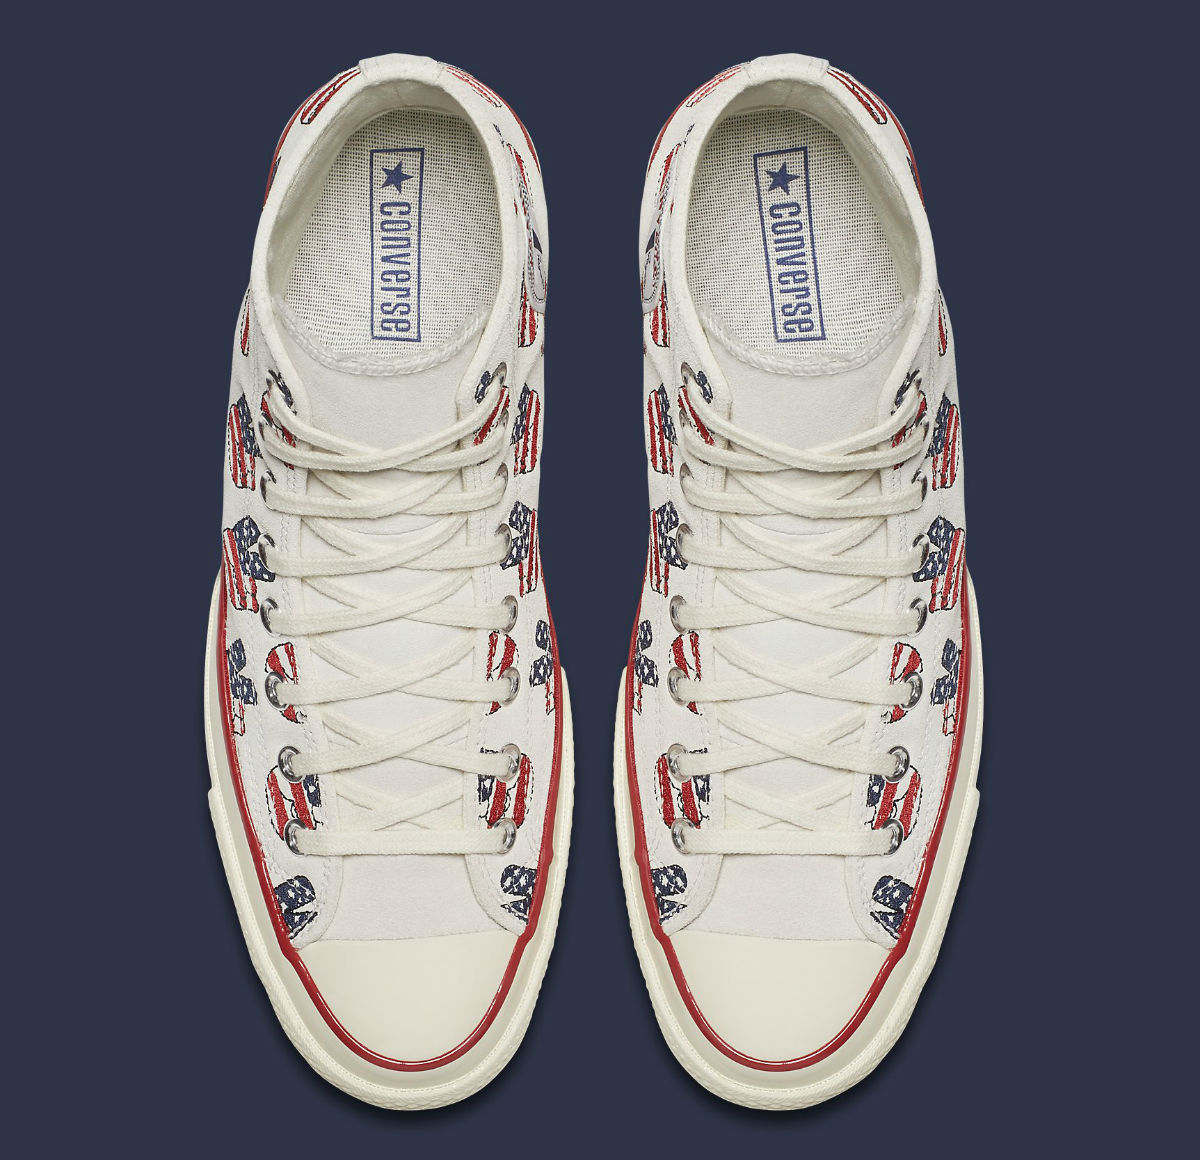 american flag peace sign converse